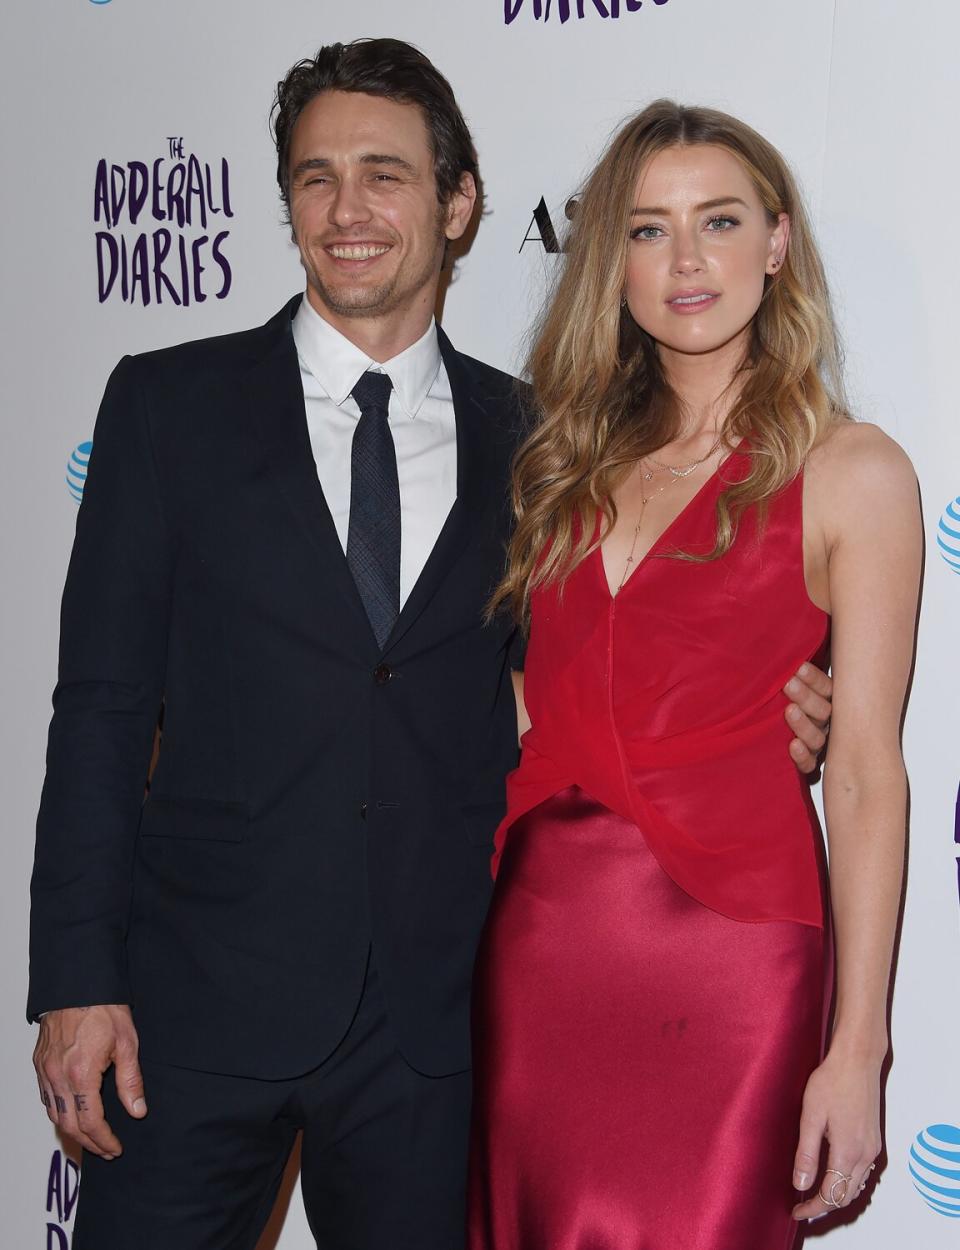 Actors James Franco and Amber Heard arrive at A24/DIRECTV's 'The Adderall Diaries' Premiere at ArcLight Hollywood on April 12, 2016 in Hollywood, California